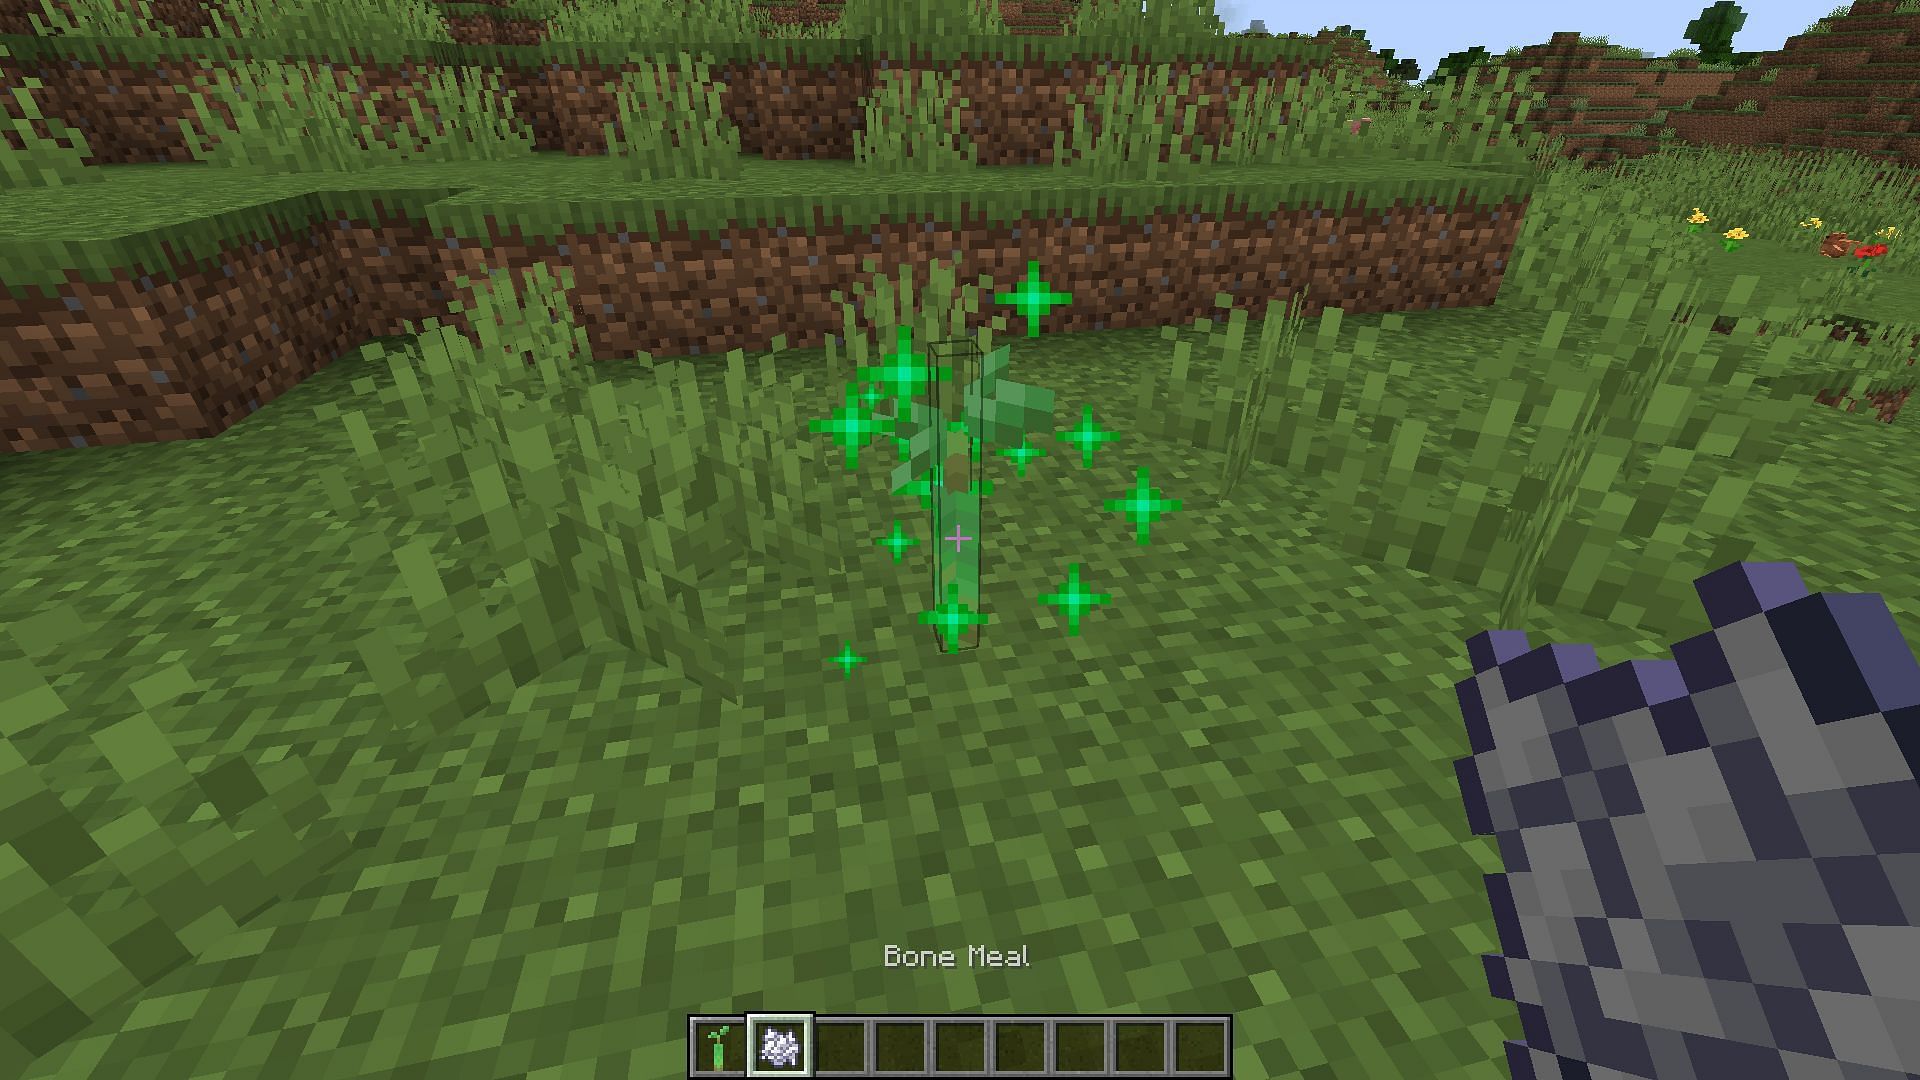 The particle effect after using bone meal on a sapling (Image via Minecraft)